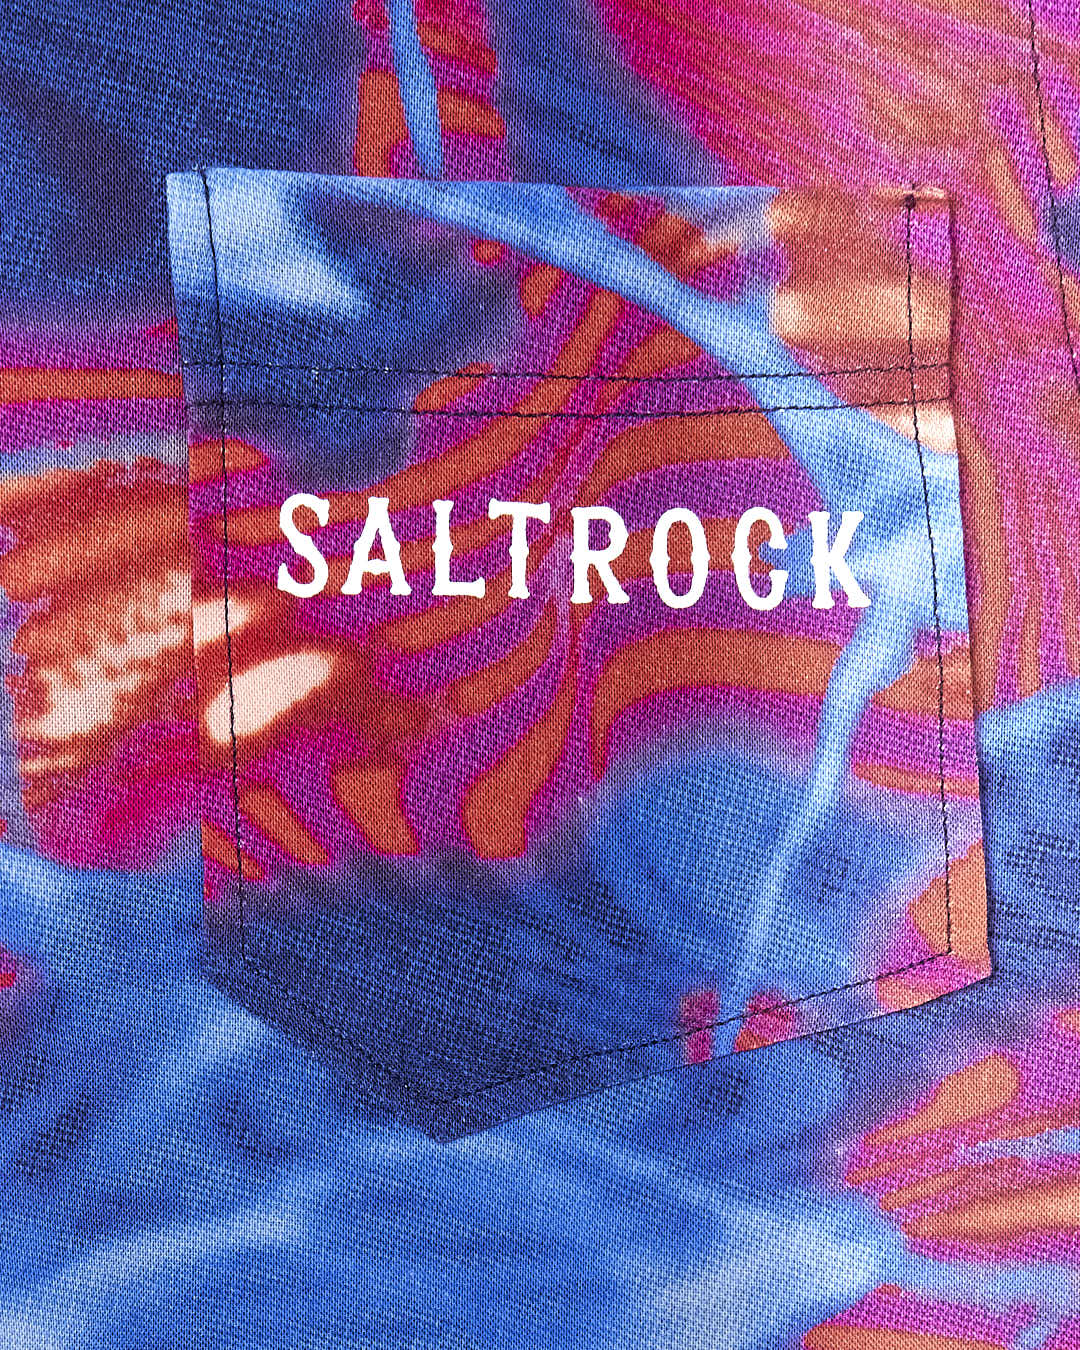 A pocket with the brand name Saltrock and the product name Poolside - Kids All Over Print Short Sleeve Shirt - Multi on it.